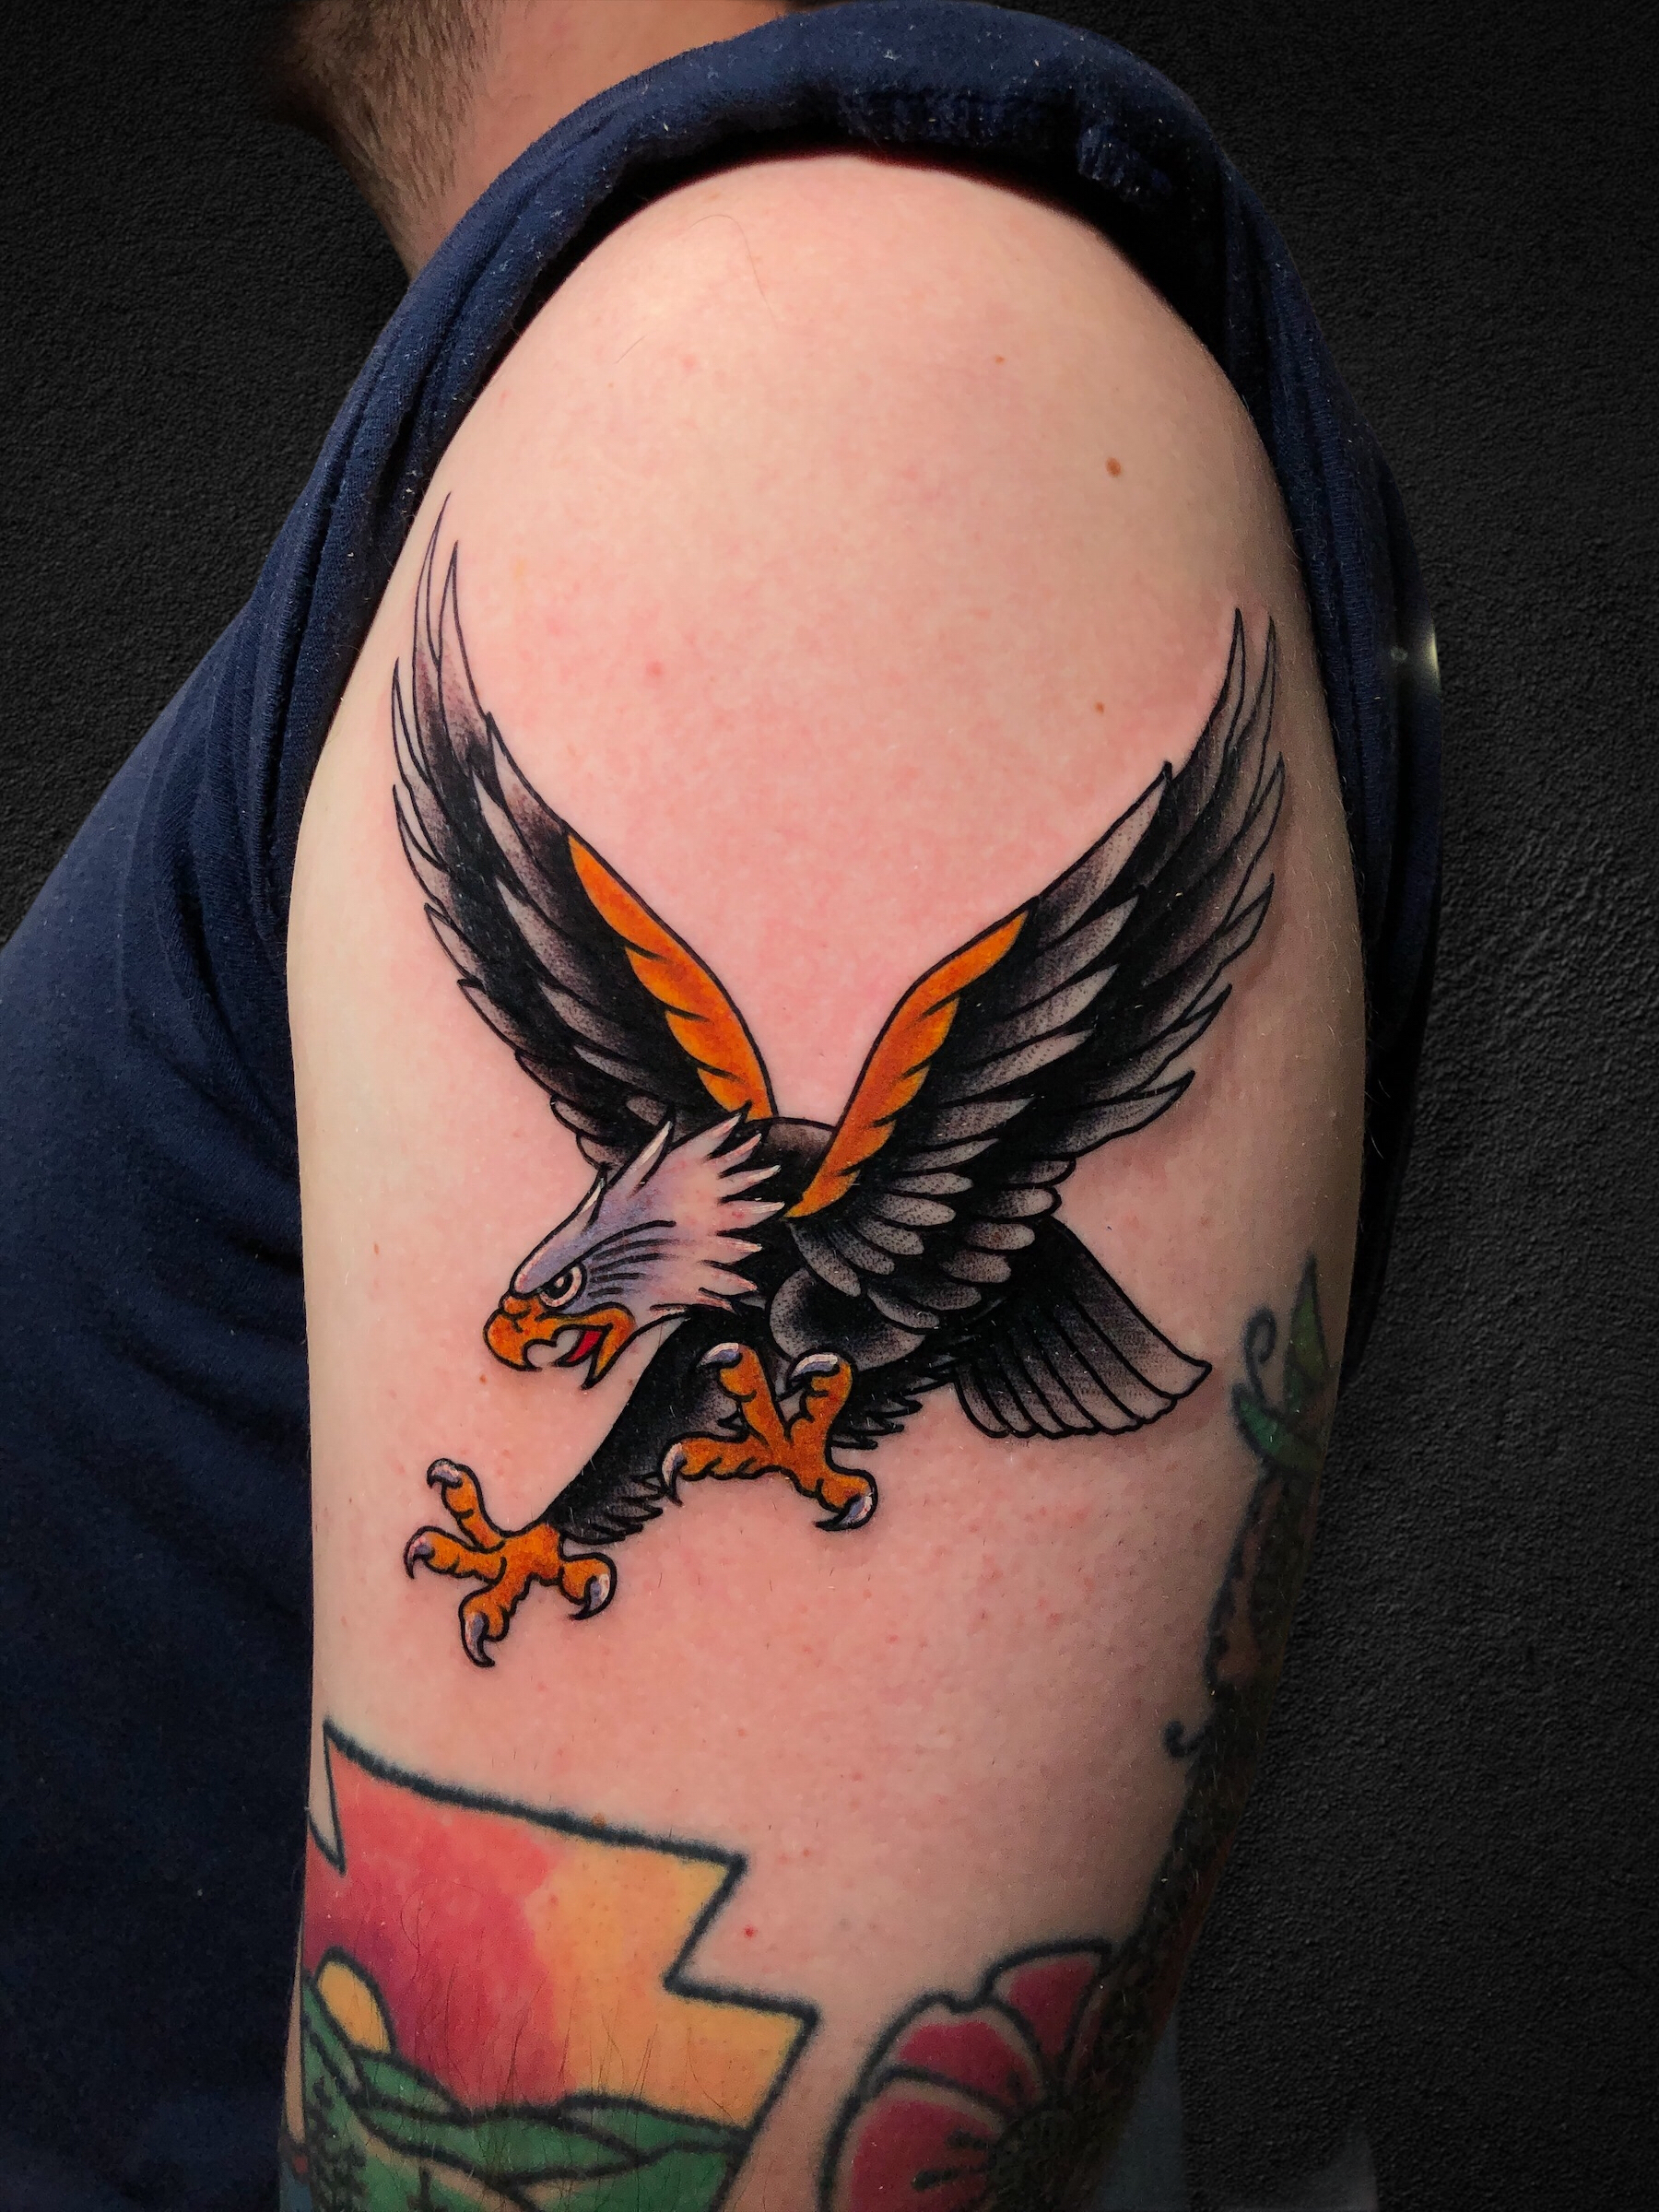 Tattoo uploaded by Stacie Mayer  Black and grey traditional eagle tattoo  by Nick Rutherford traditional NickRutherford tattooflash eagle bird  blackandgrey  Tattoodo